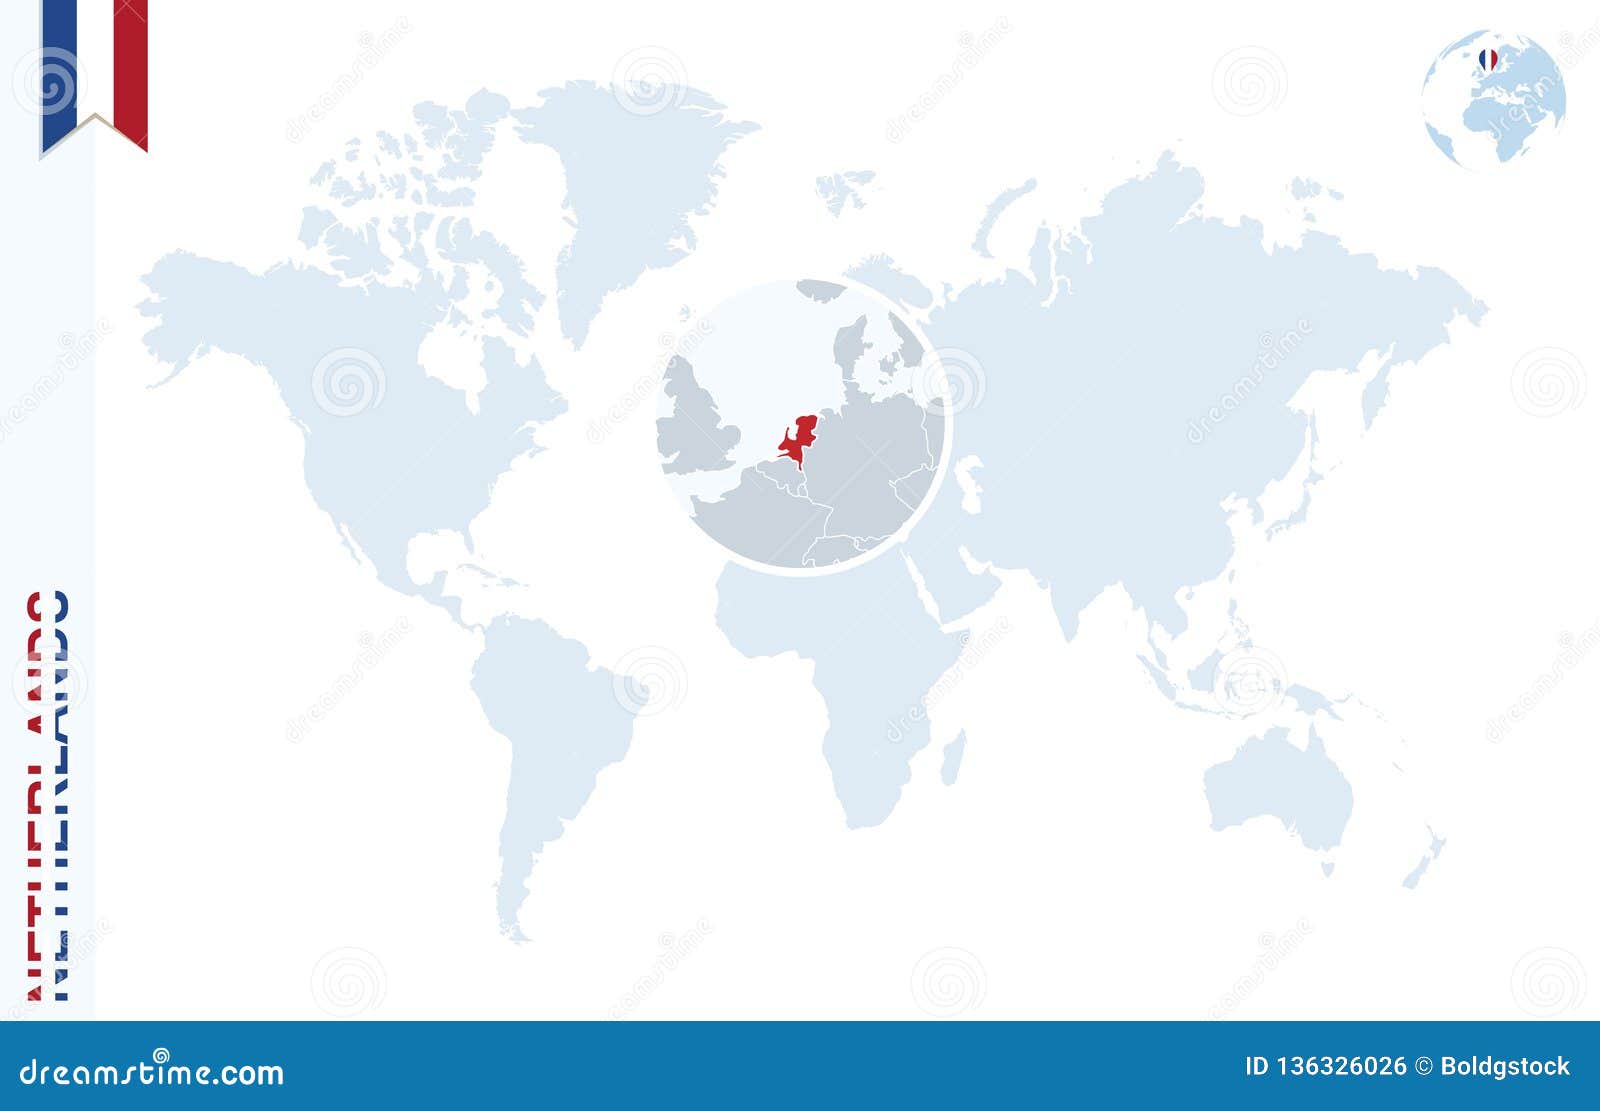 Blue World Map With Magnifying On Netherlands Stock Vector